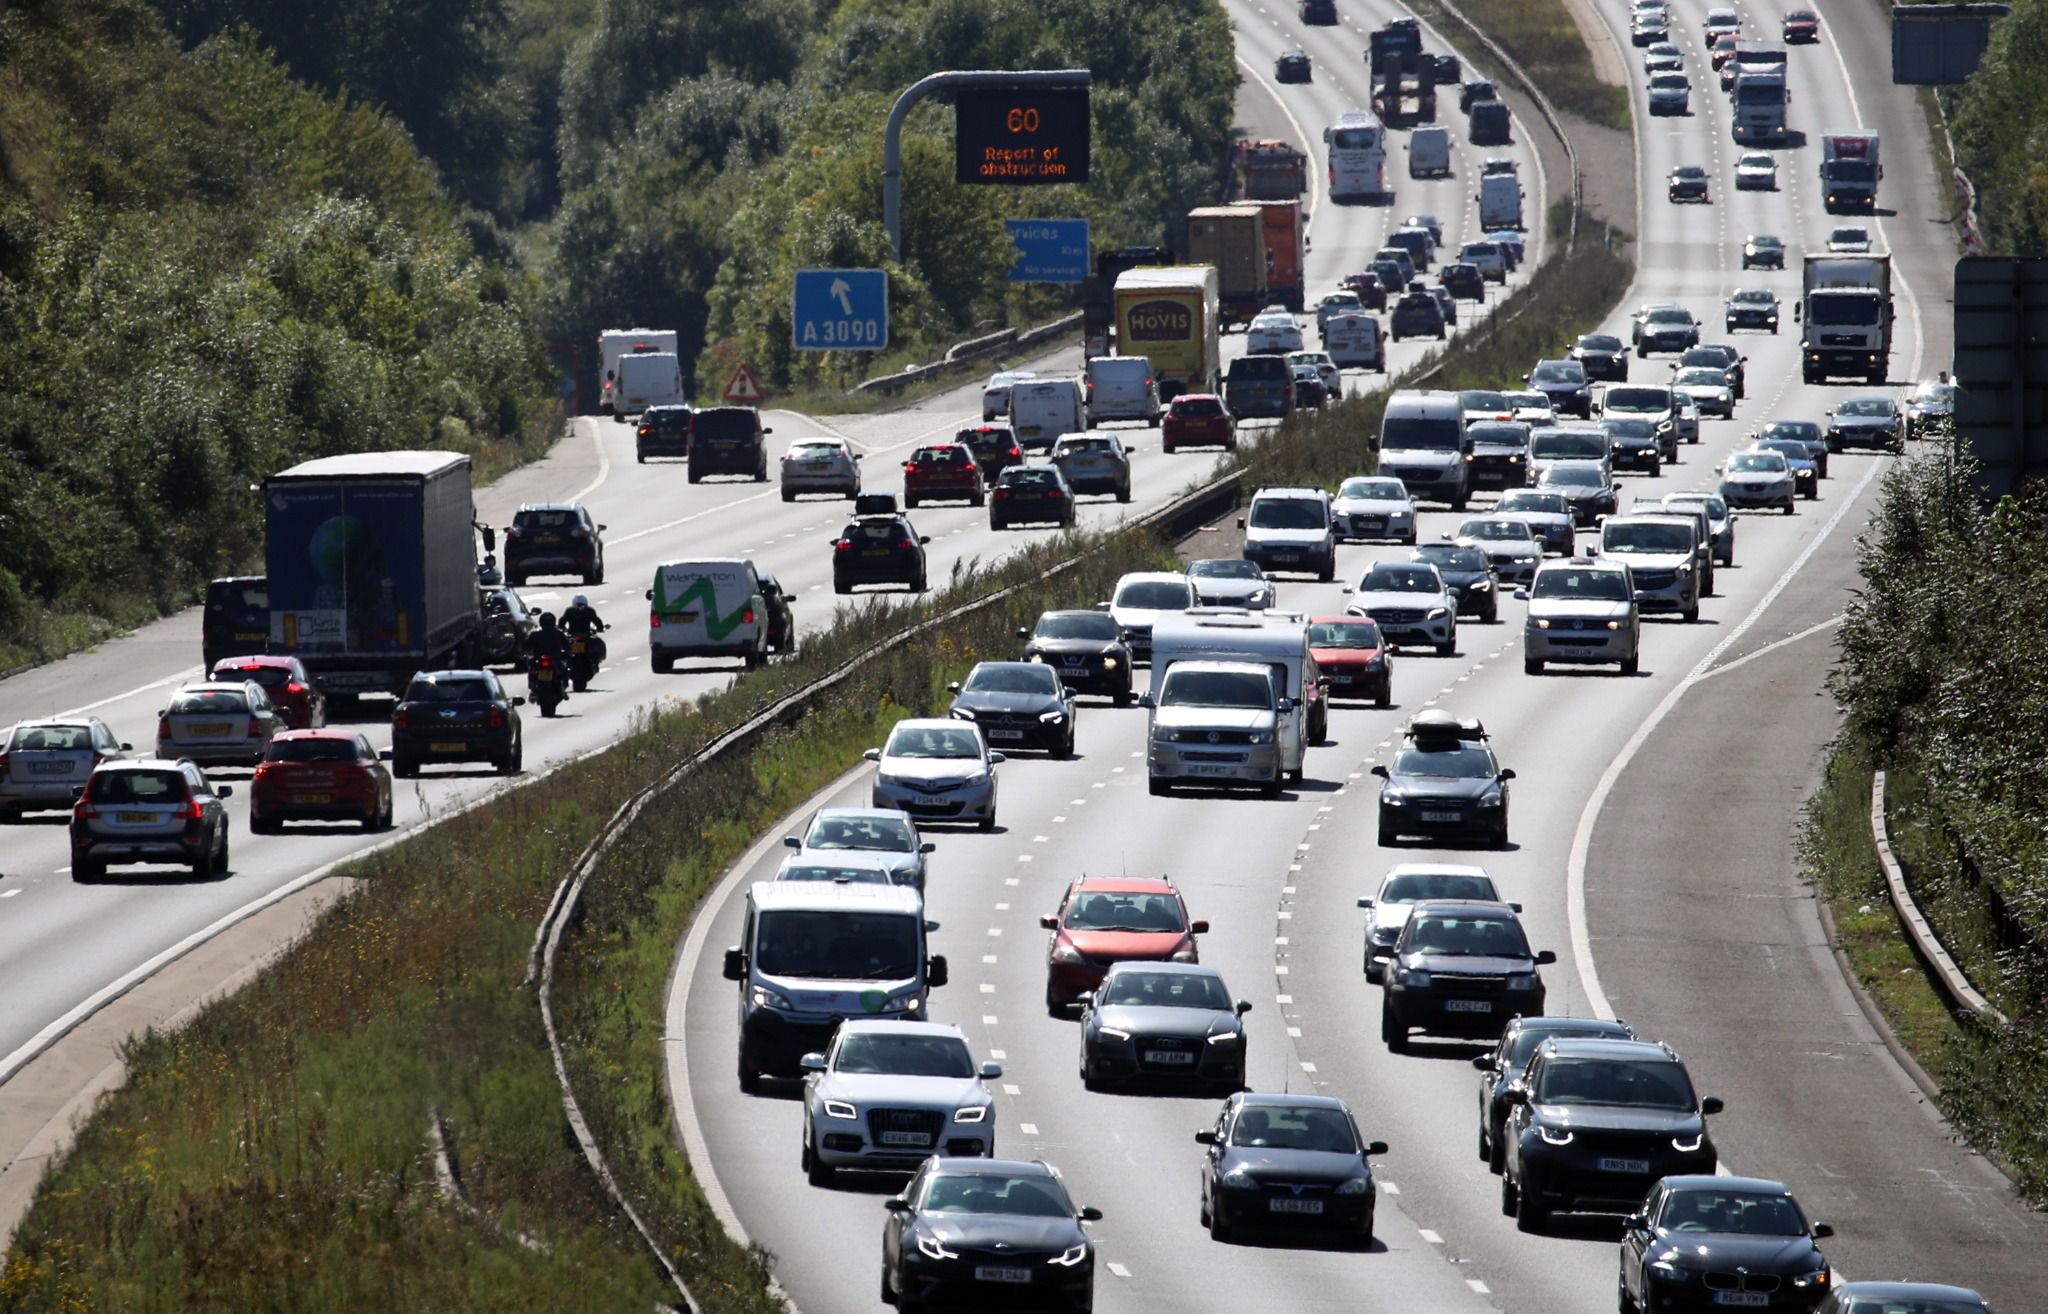 Image of a traffic on a motorway